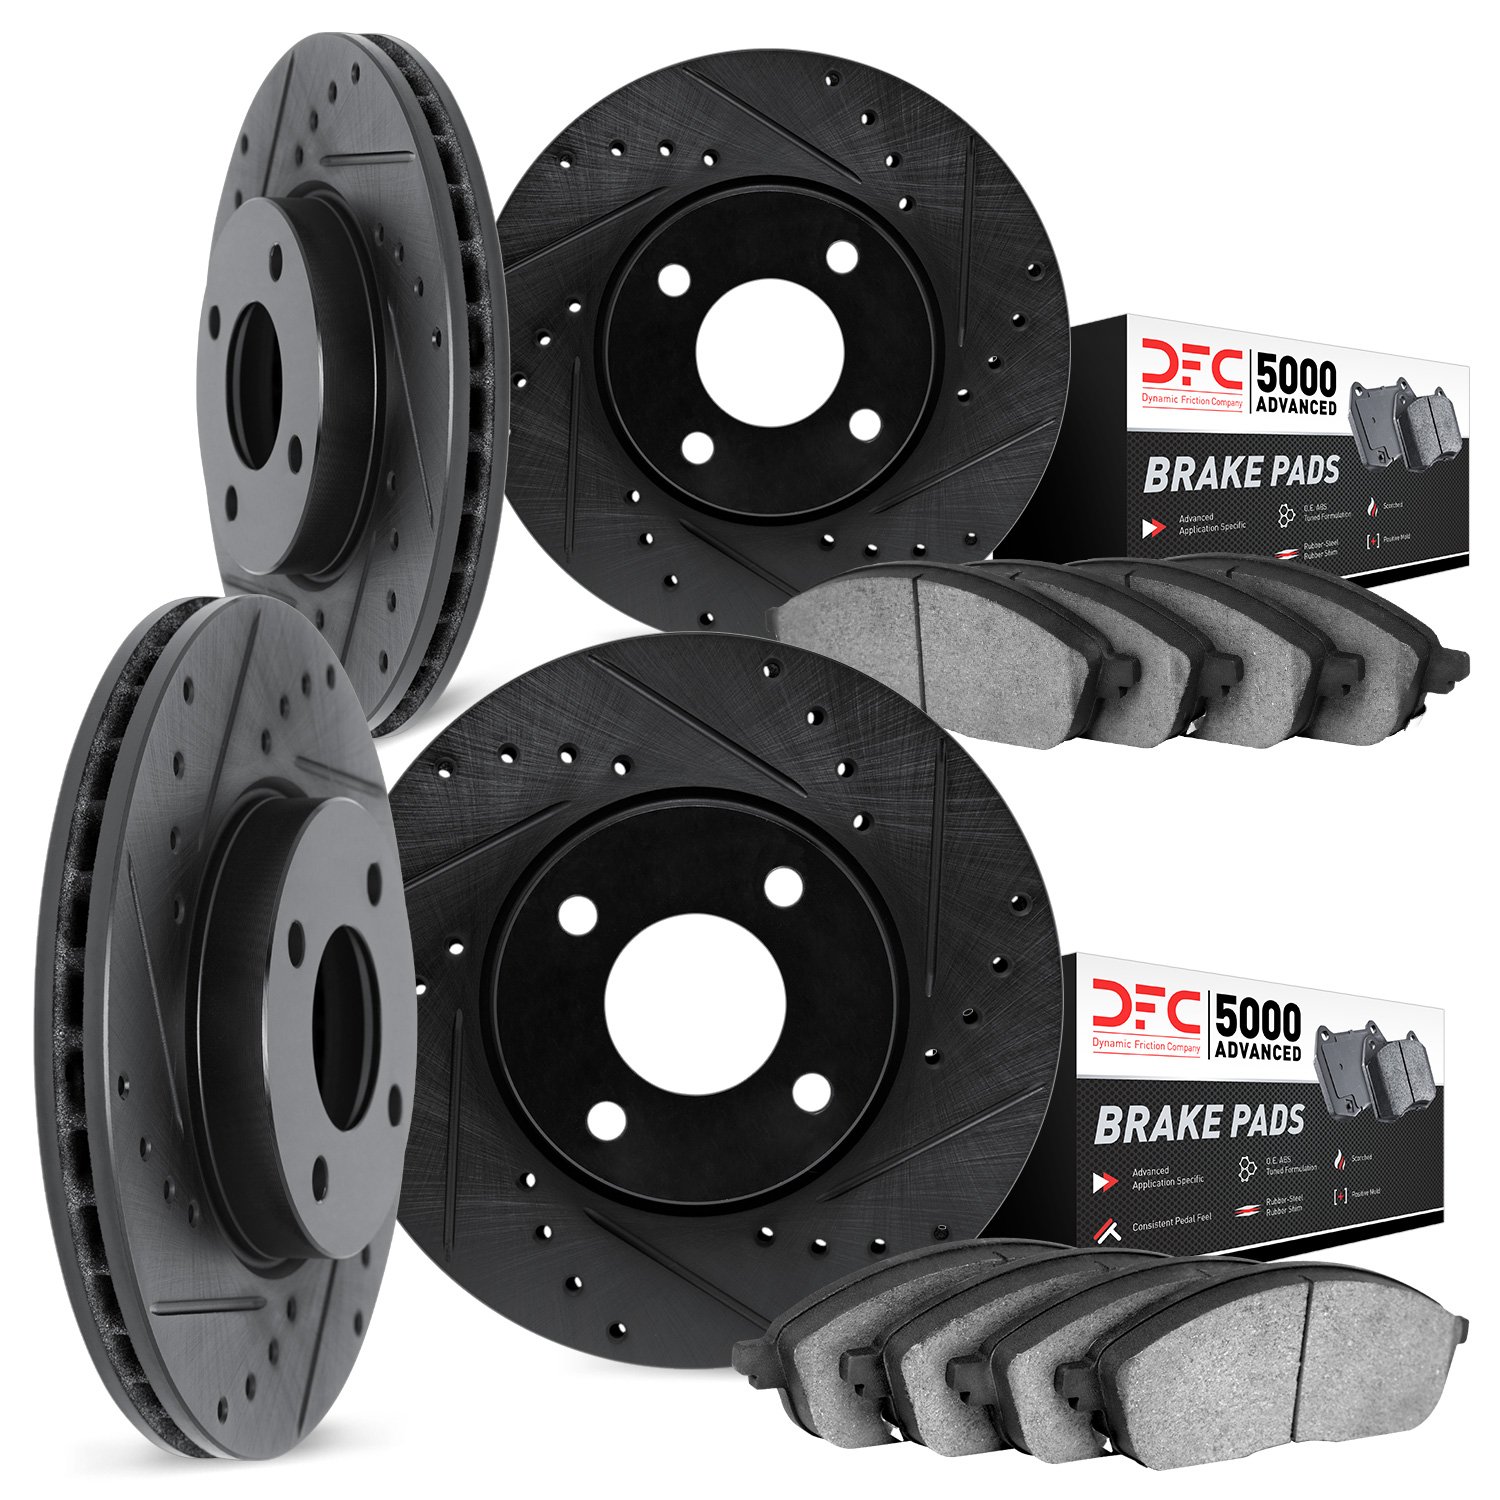 8504-76117 Drilled/Slotted Brake Rotors w/5000 Advanced Brake Pads Kit [Black], 1985-1988 Lexus/Toyota/Scion, Position: Front an